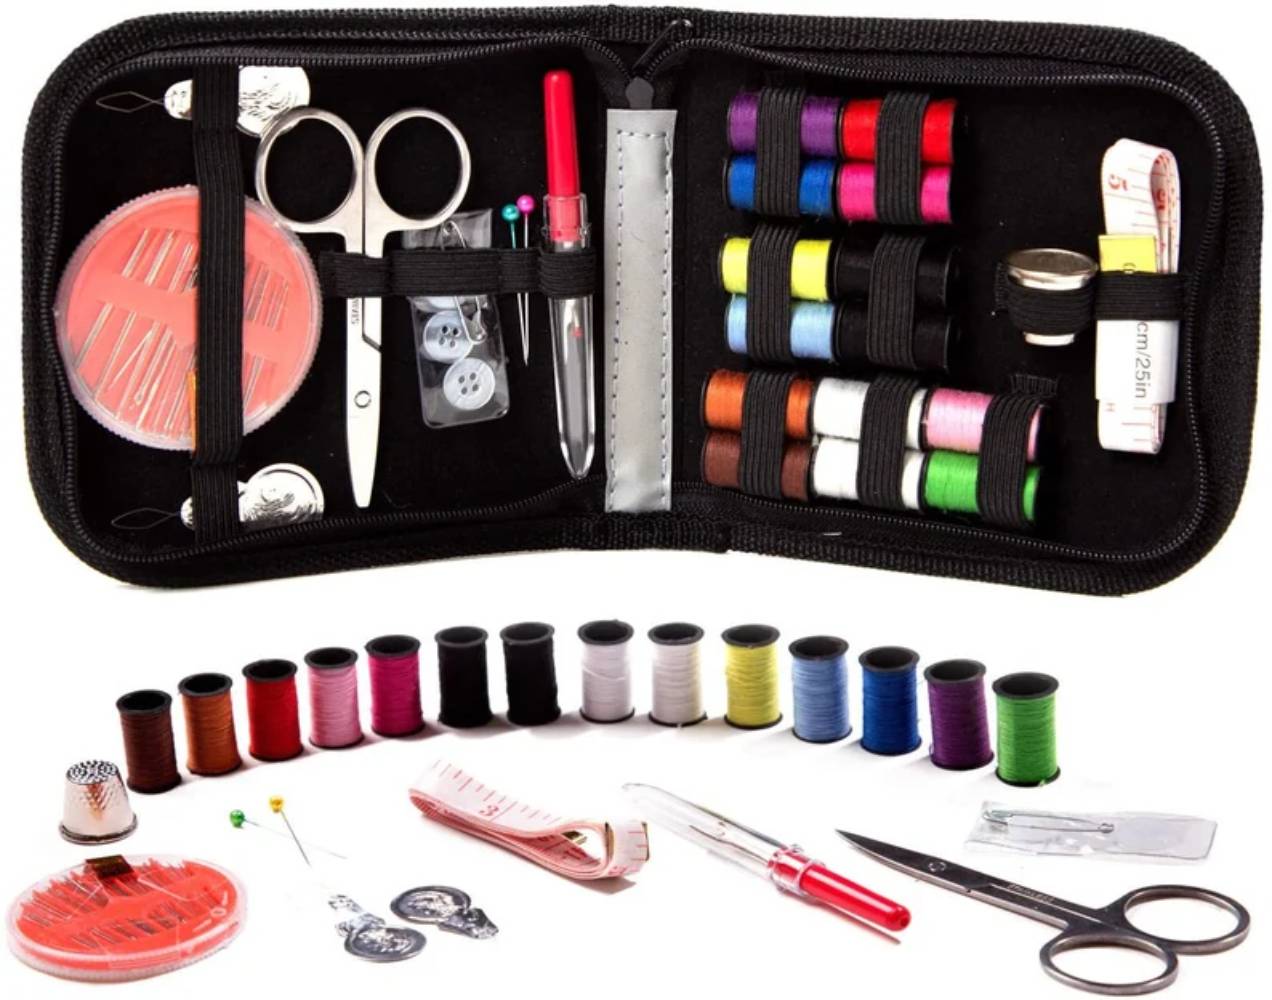 Travel Home Mini Set Portable Sewing Kit Small Box for Hand Sewing